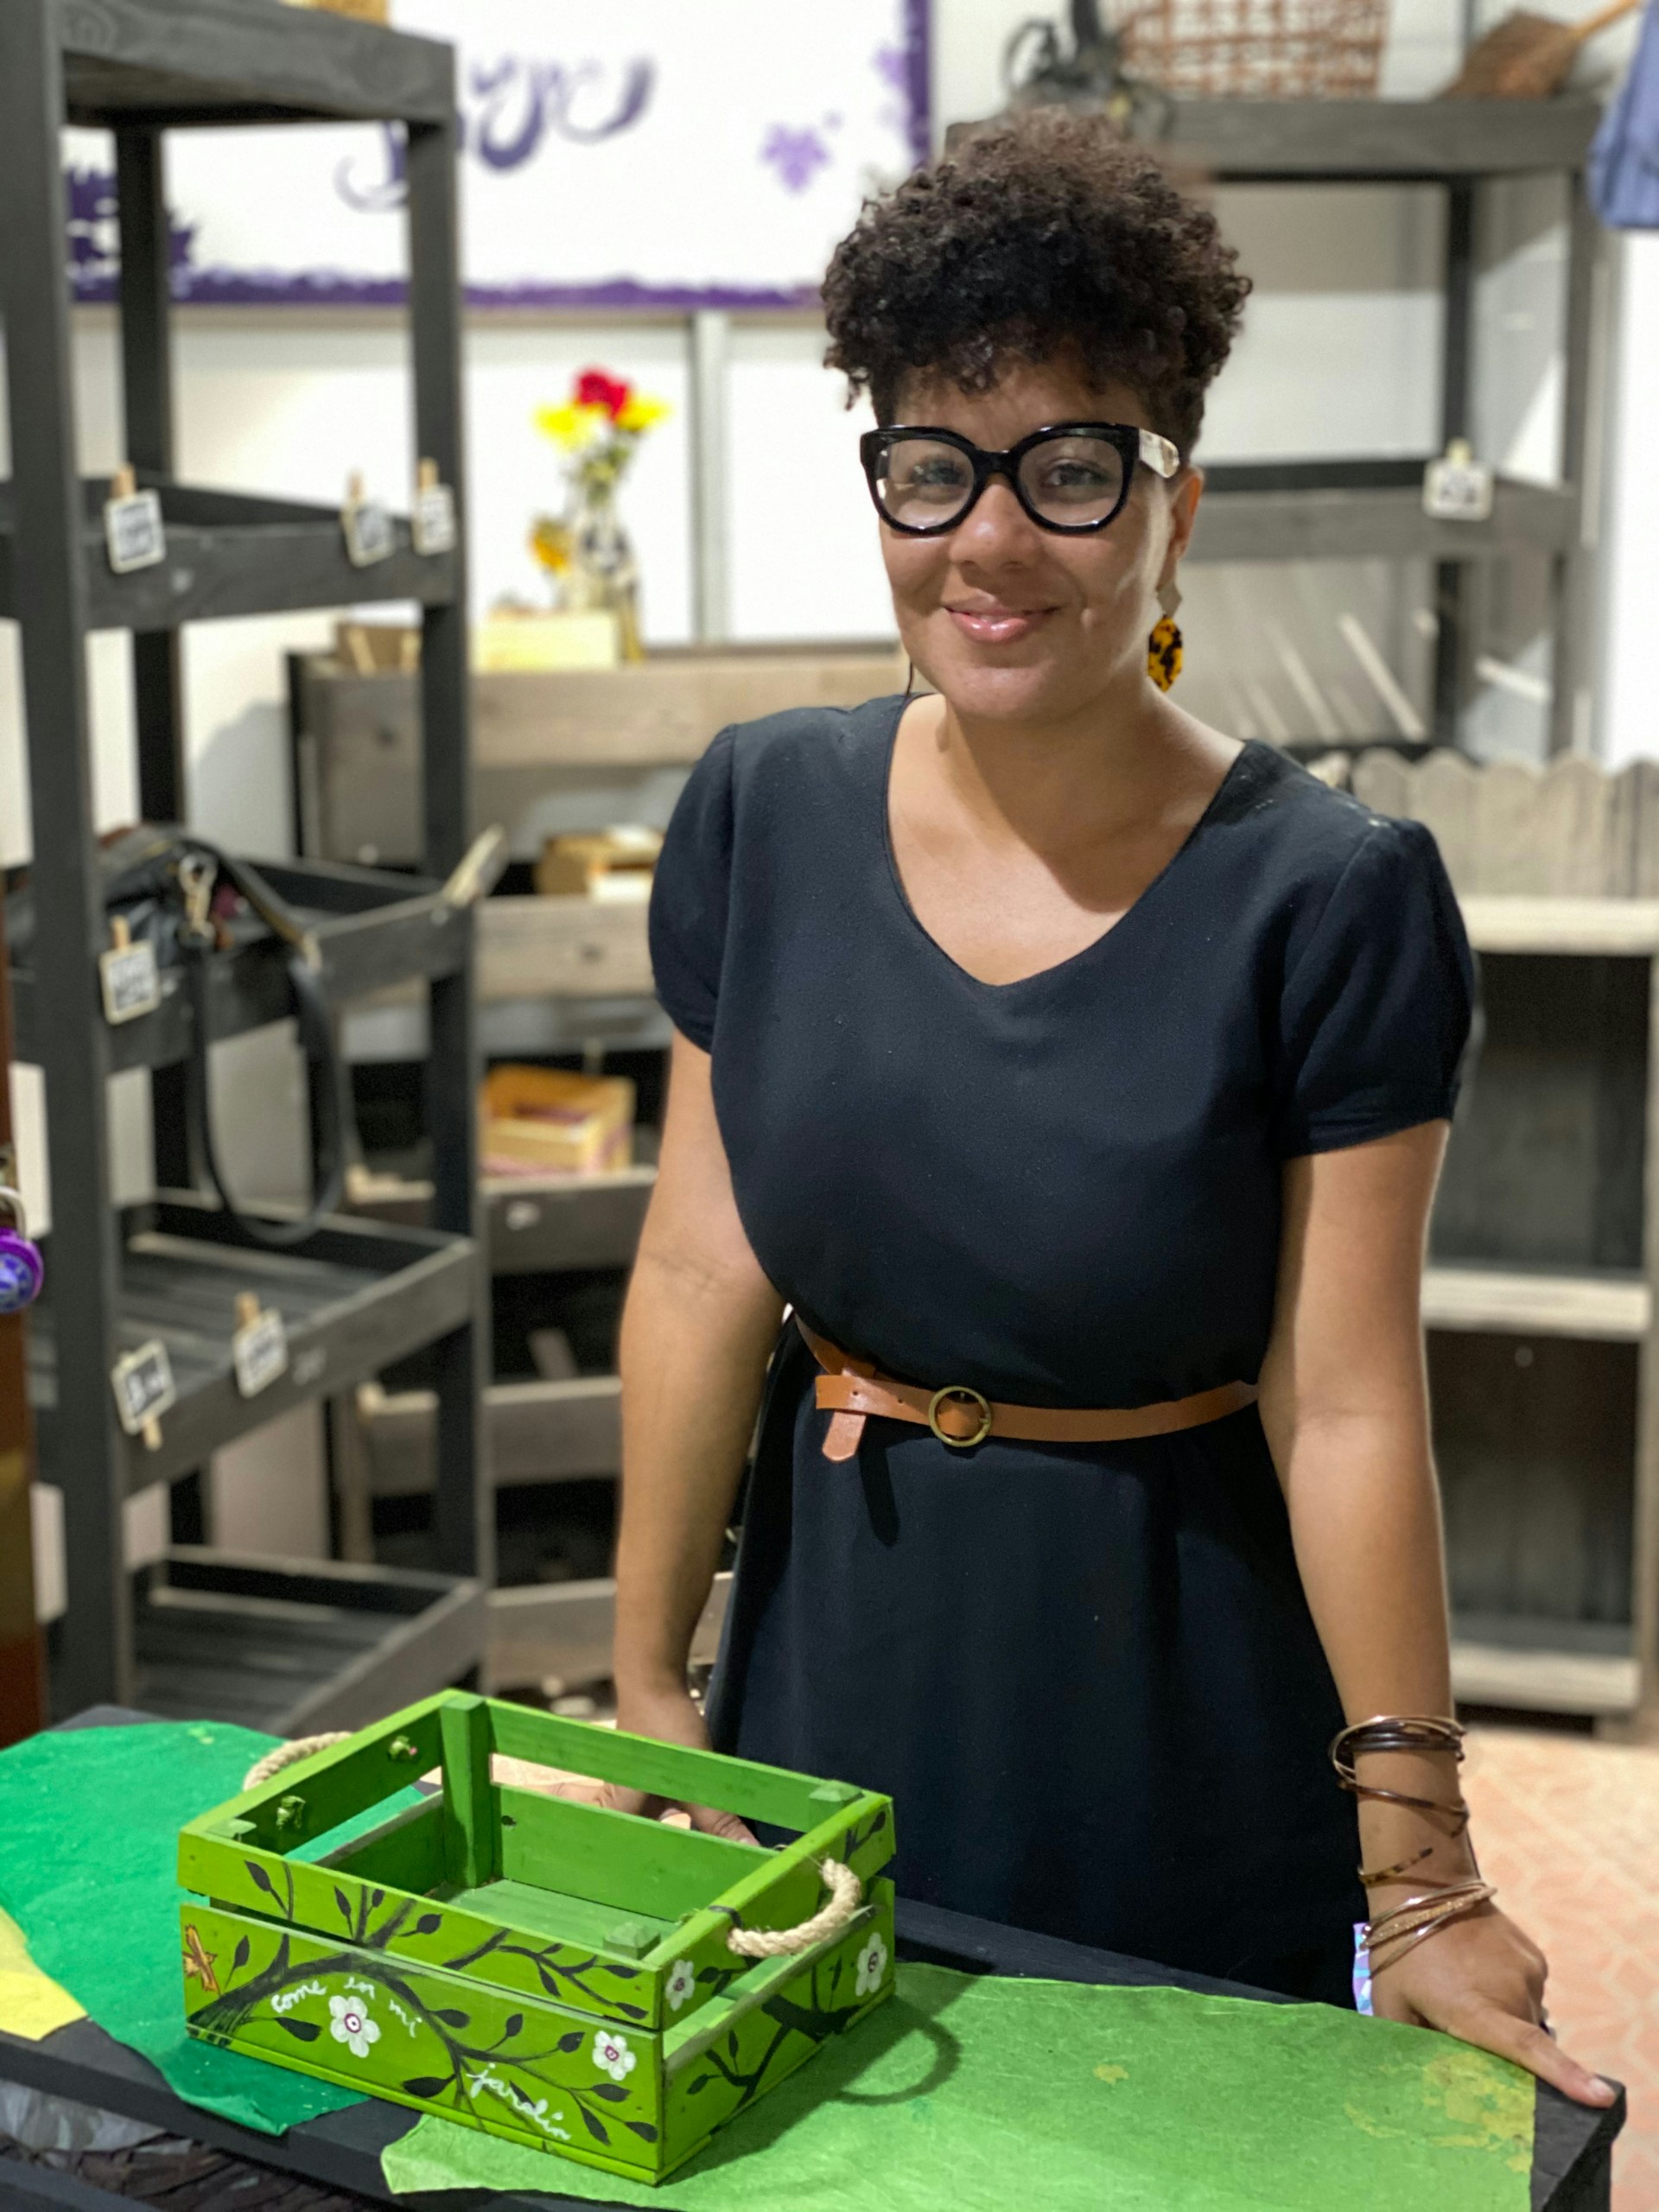 A woman wearing a black dress and glasses smiles directly at the camera. She's standing at a table with an empty green wooden crate on it